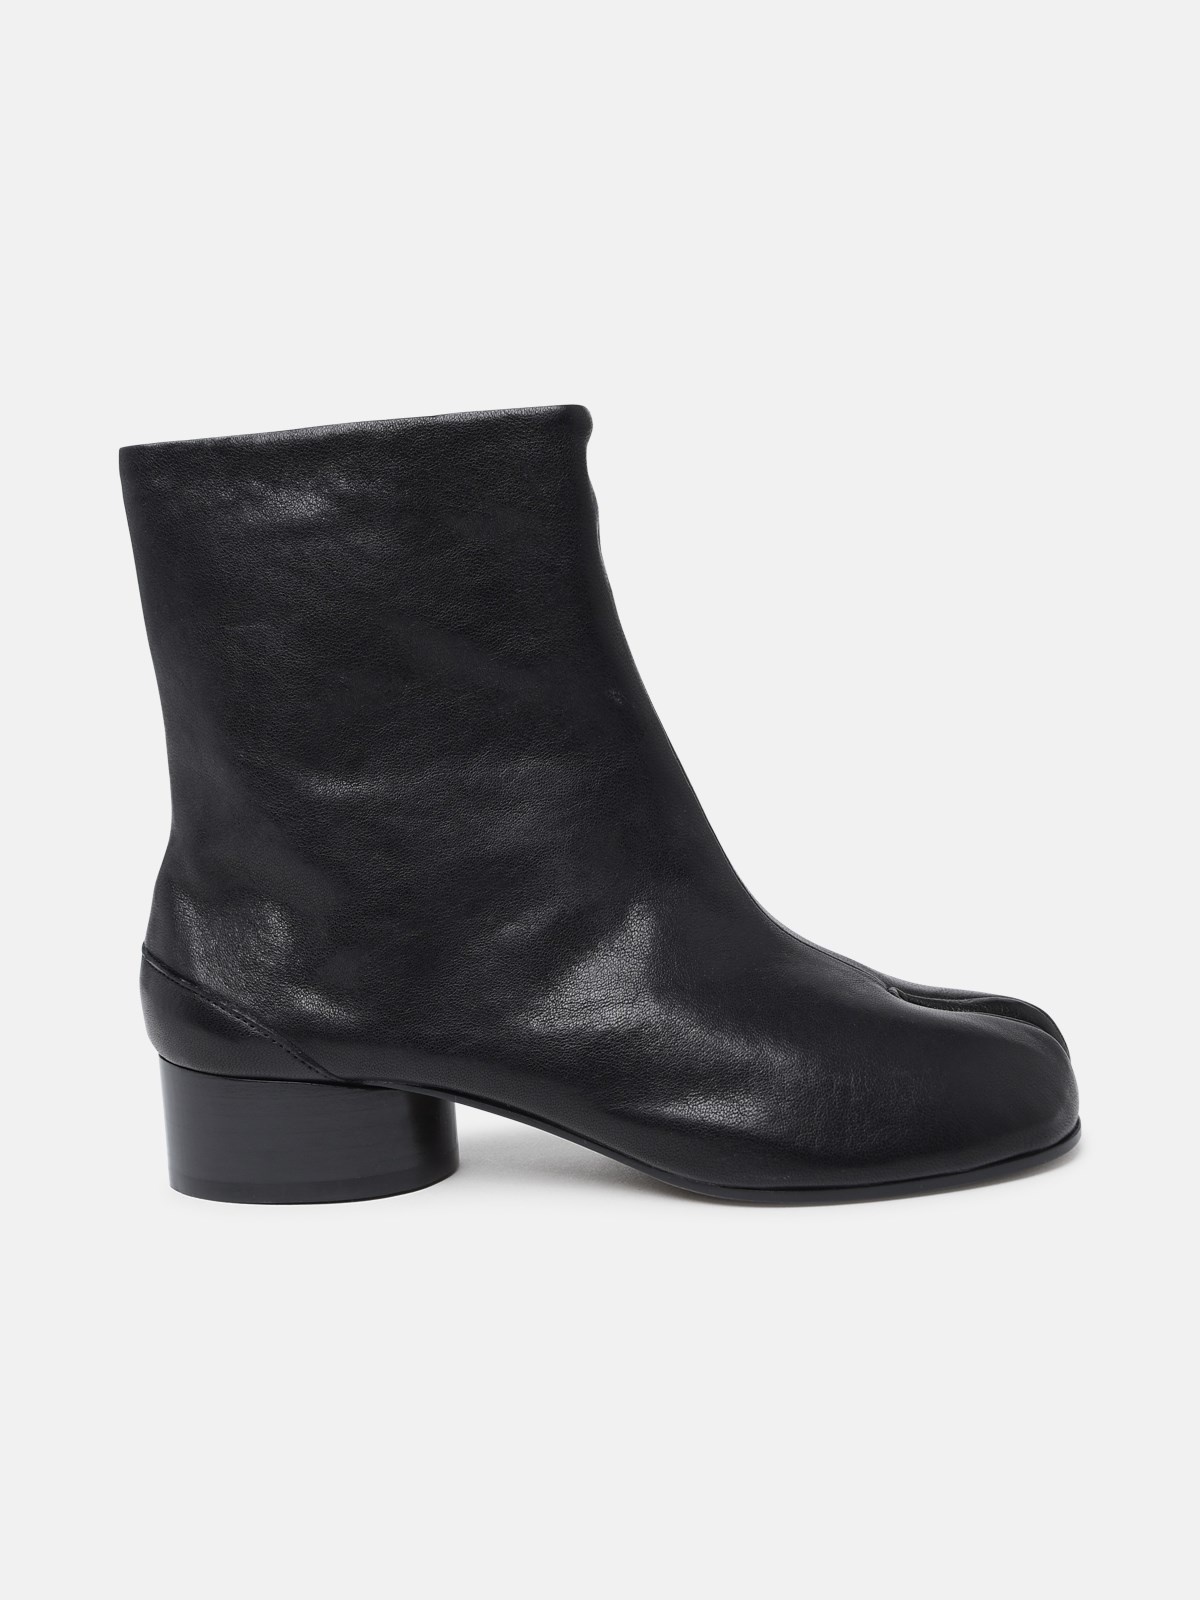 BLACK NAPPA LEATHER ANKLE BOOTS - 1